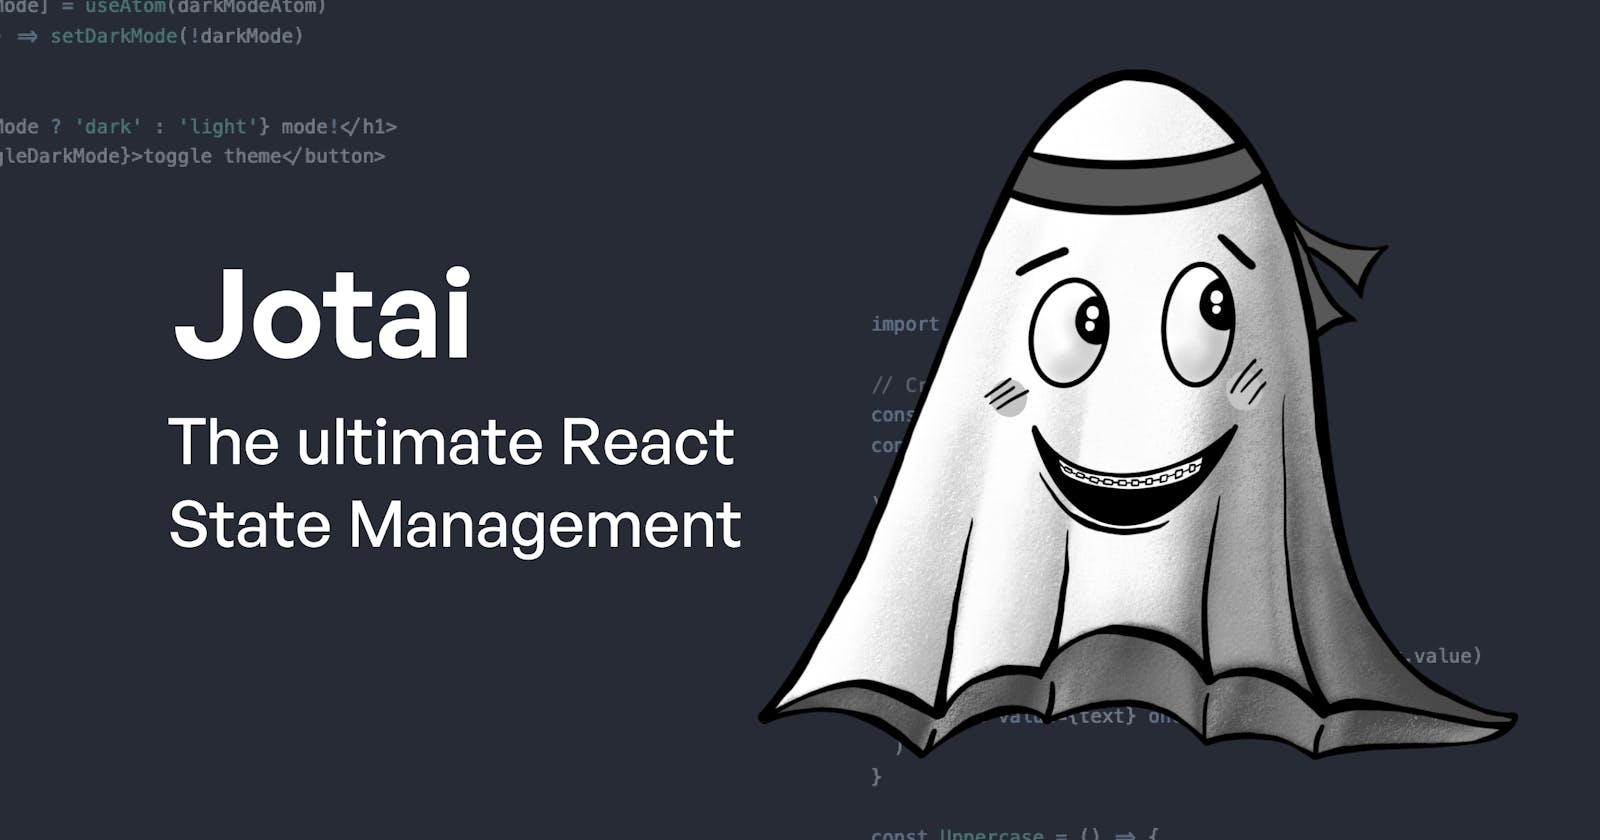 Jotai: The ultimate React State Management